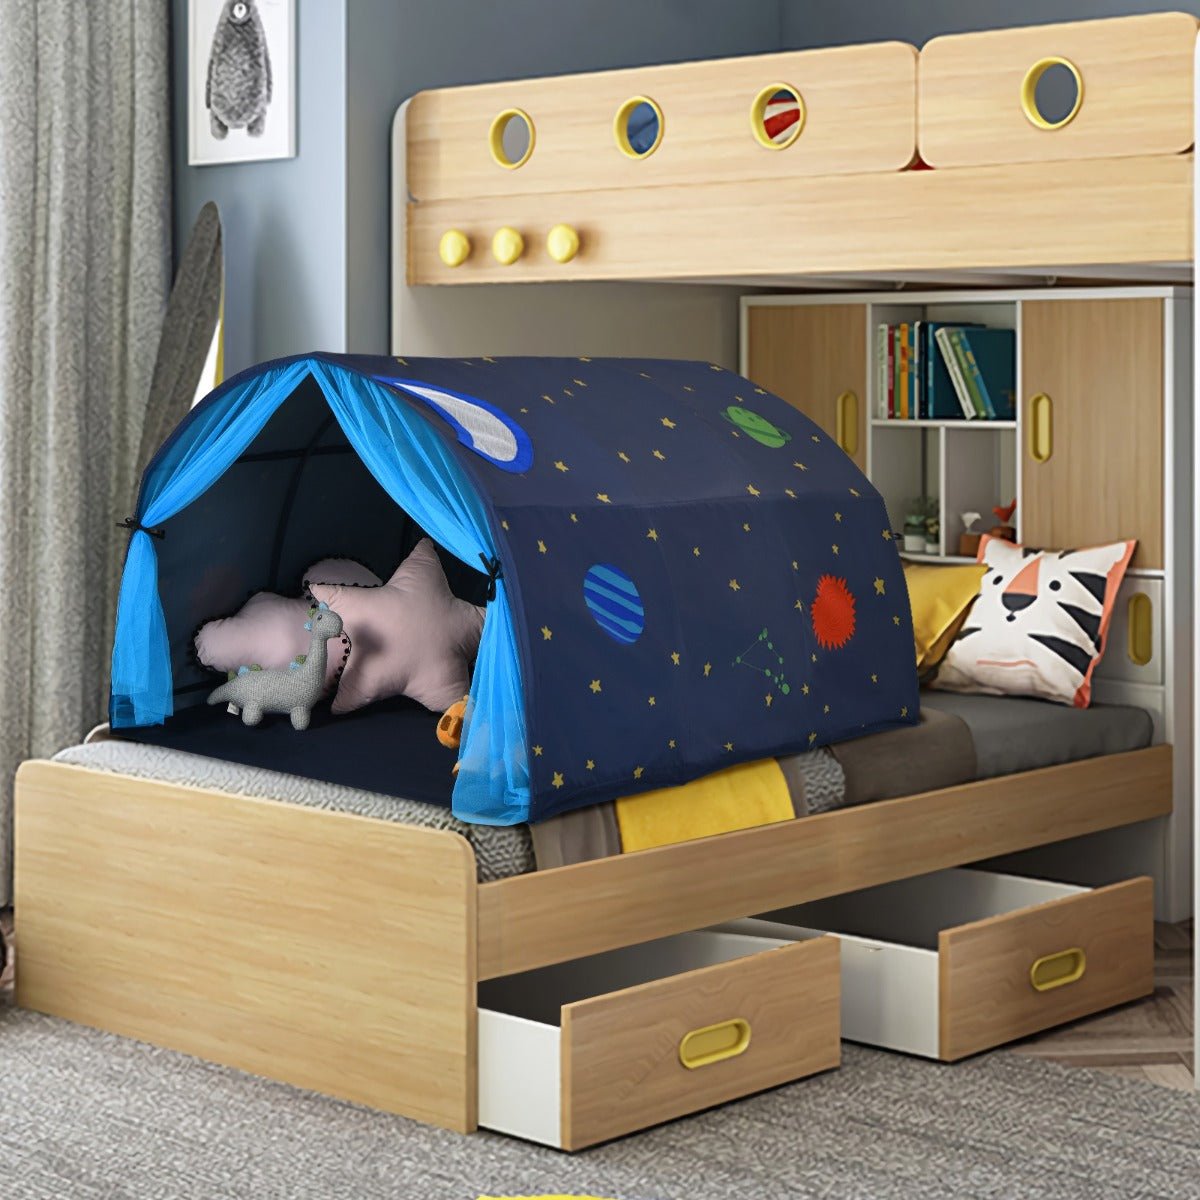 Whimsical Twin Sleeping Tent: Portable Playhouse with Carry Bag